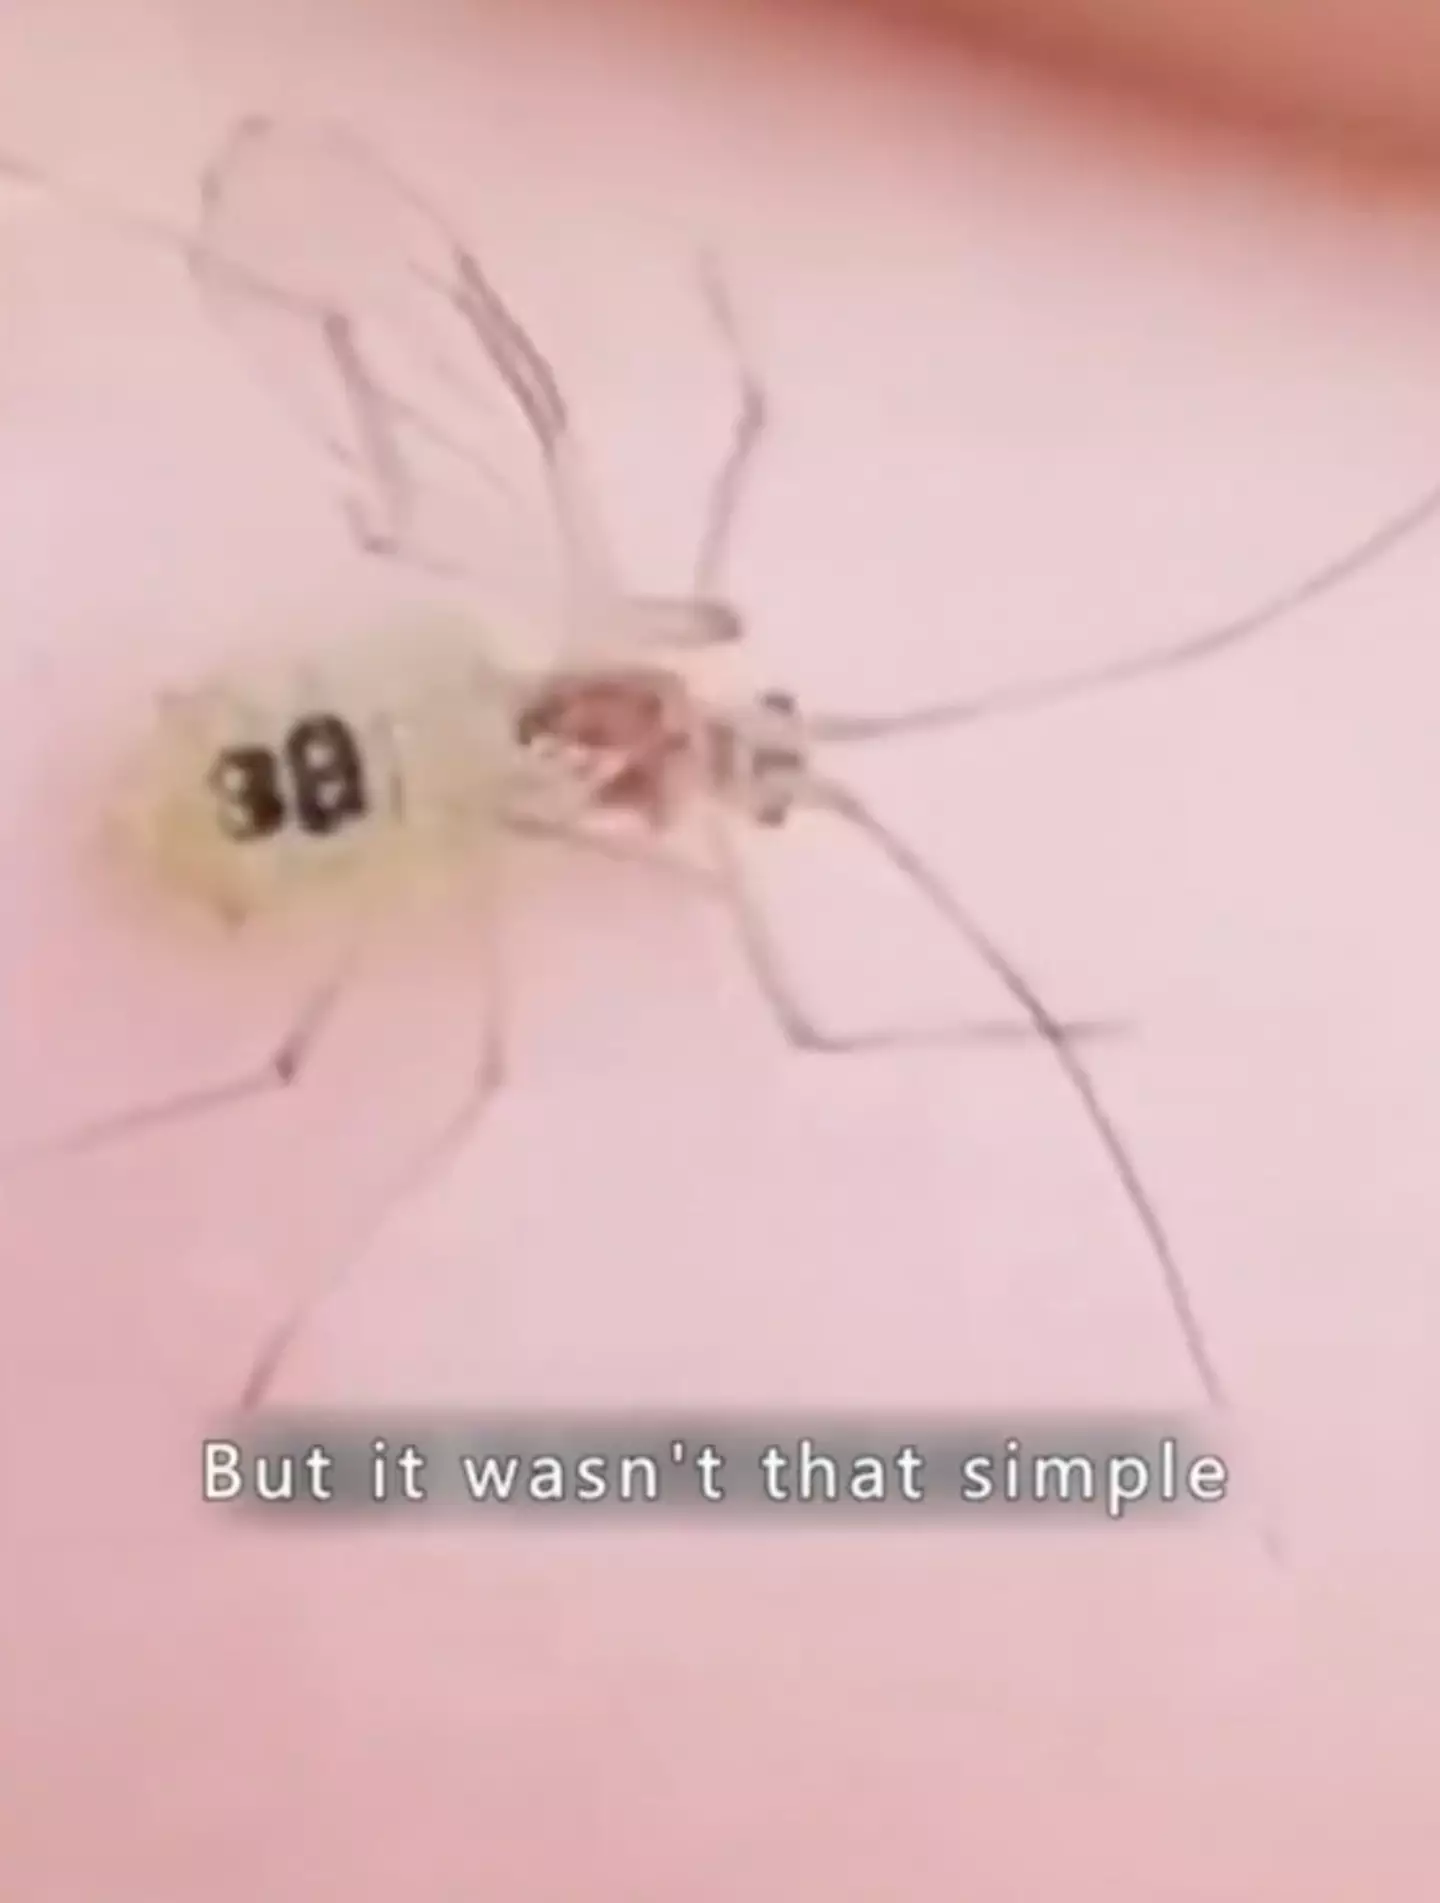 There's no confirmation as to why the mosquitos were spotted with numbers on their backs.